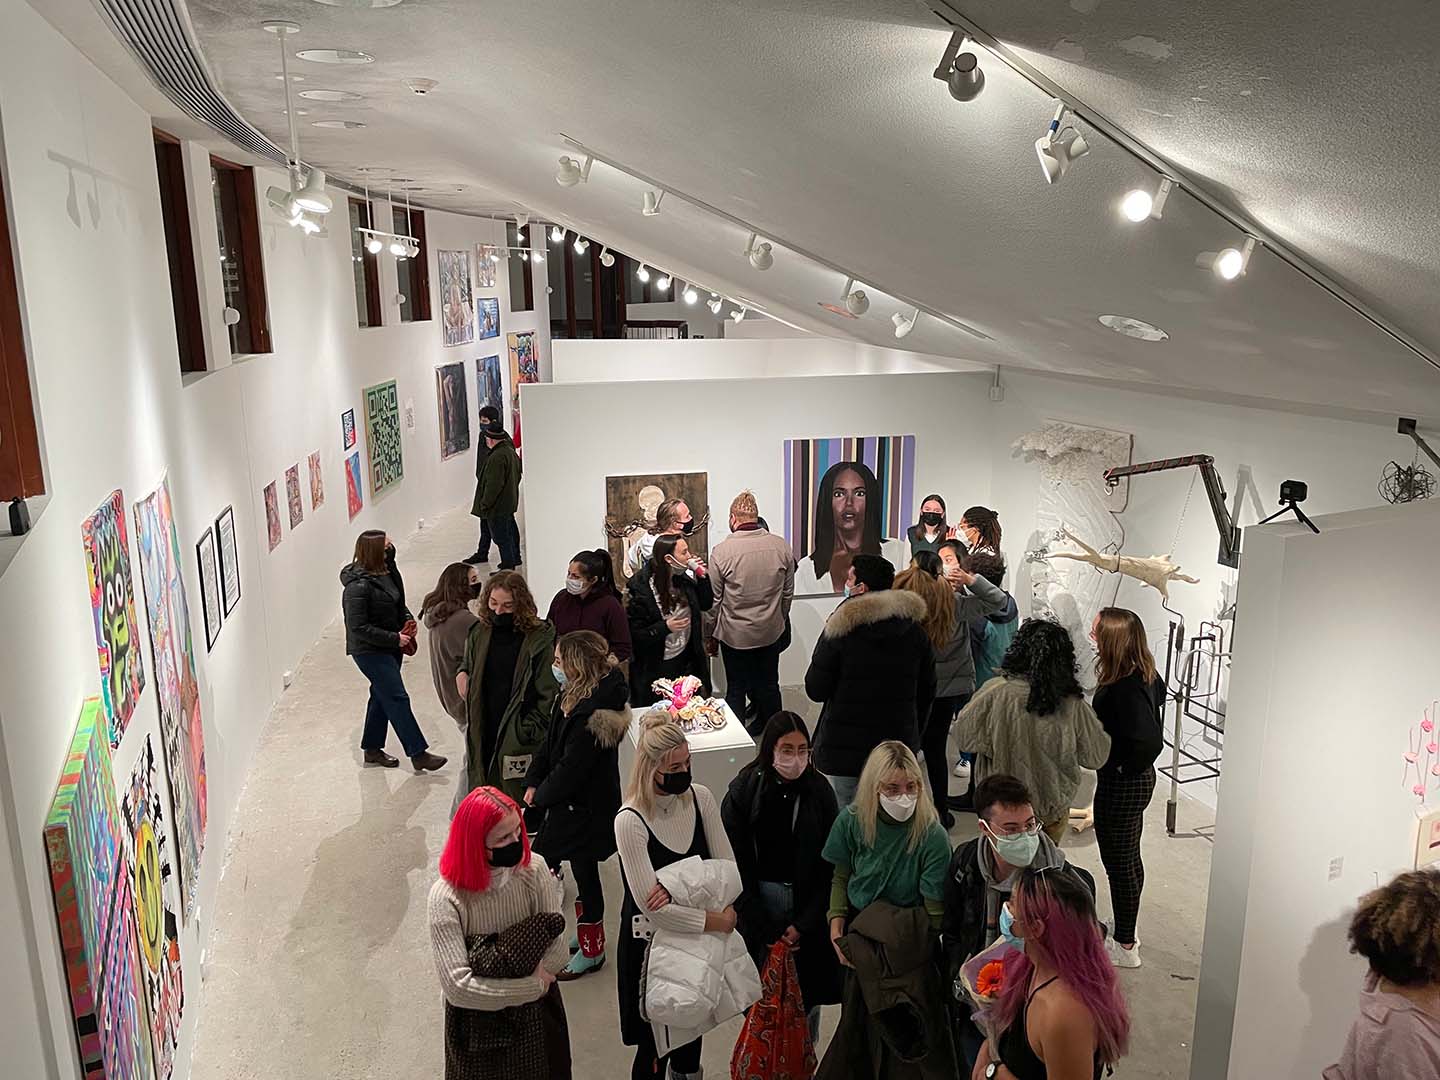 Students and guests standing and talking in front of artwork on the walls